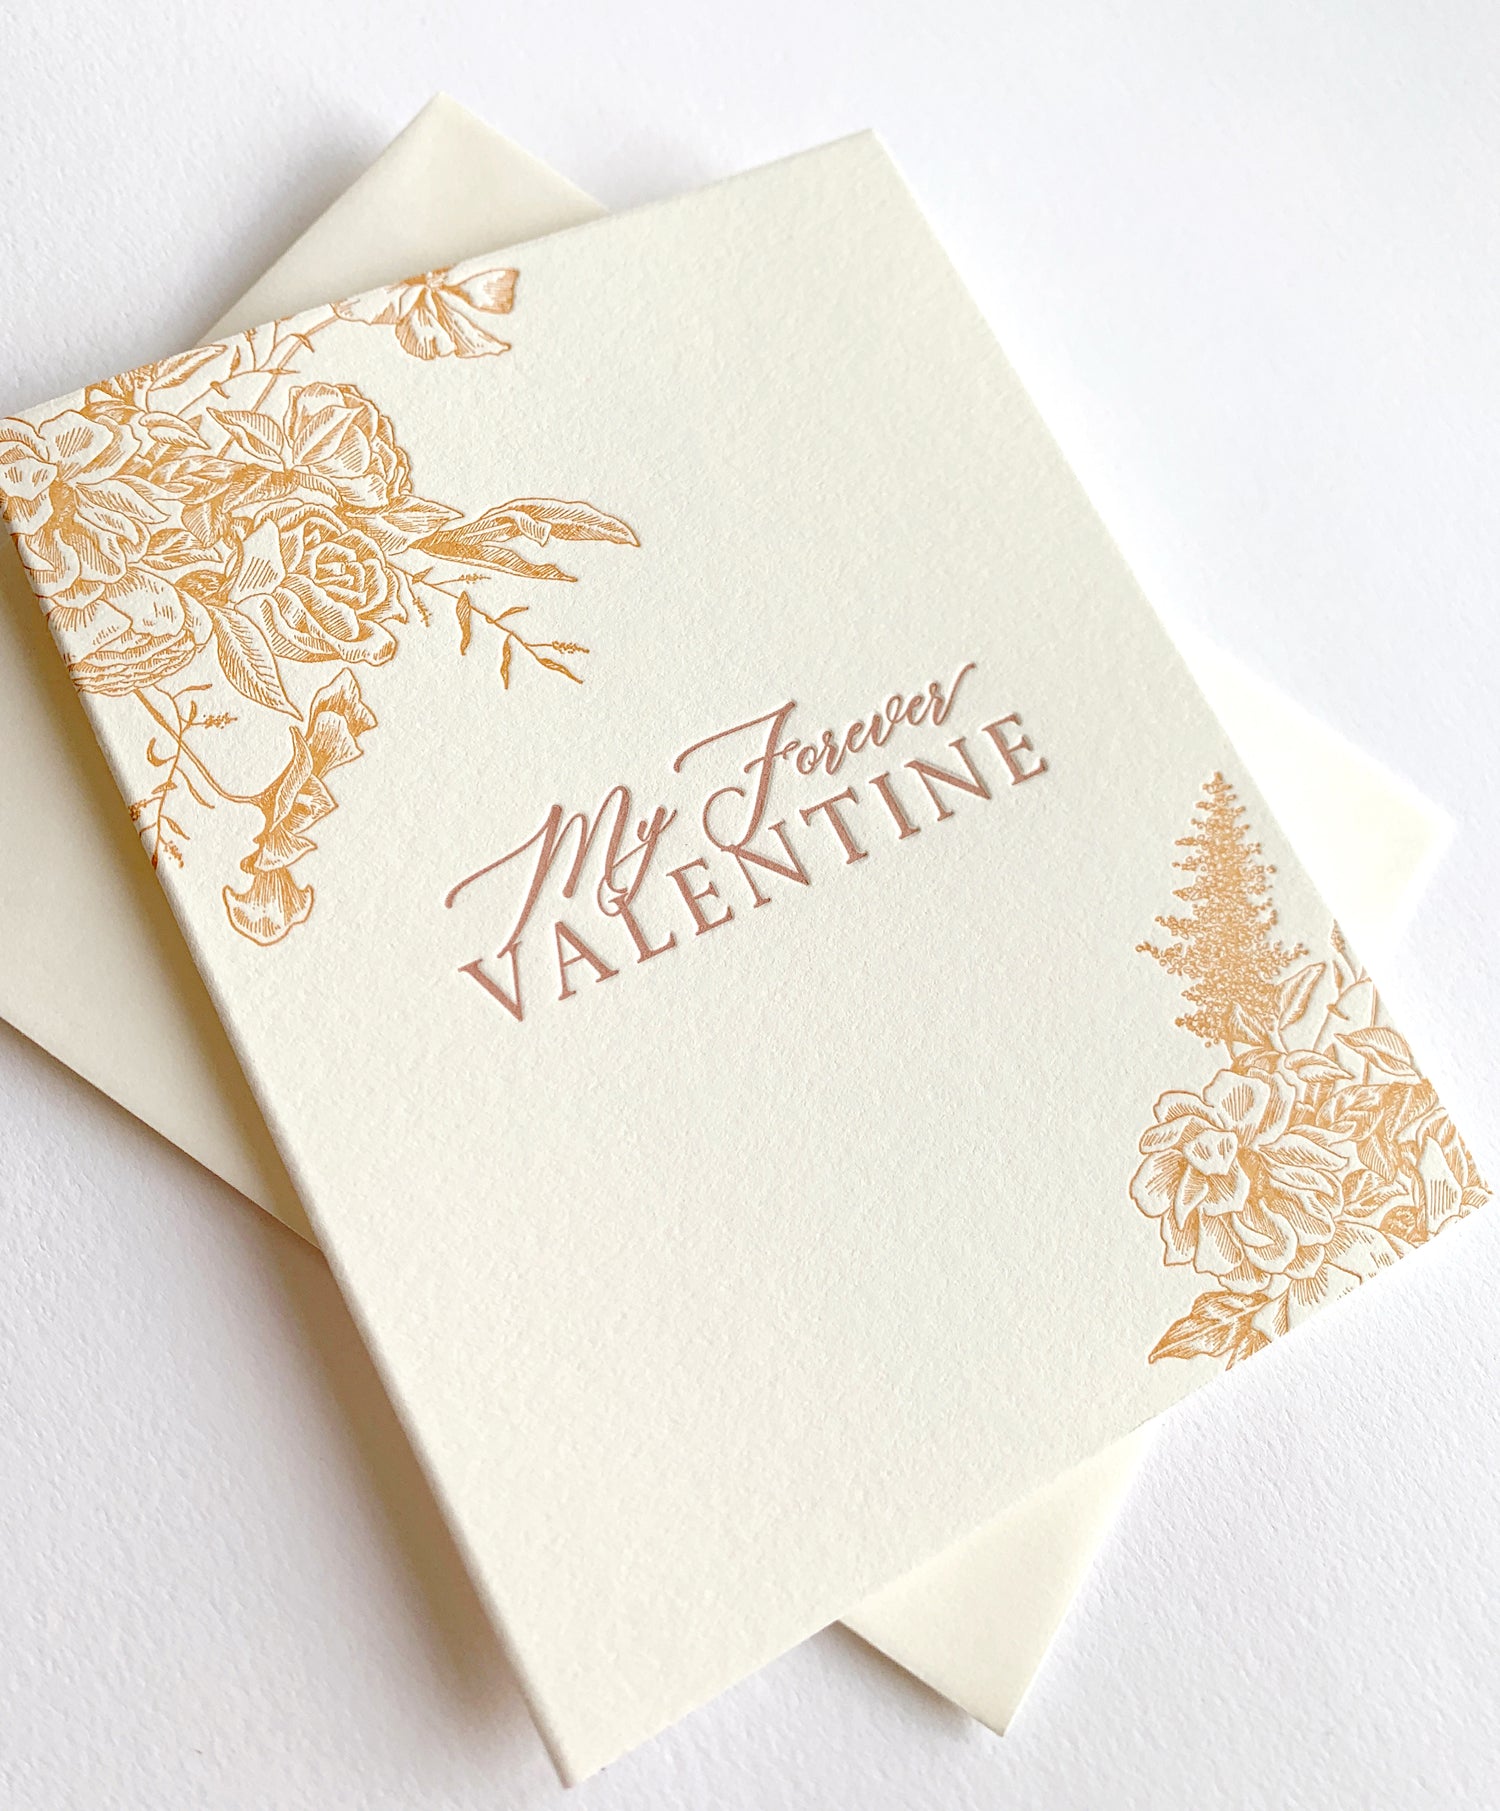 Letterpress love card with florals that says "My forever valentine" by Rust Belt Love